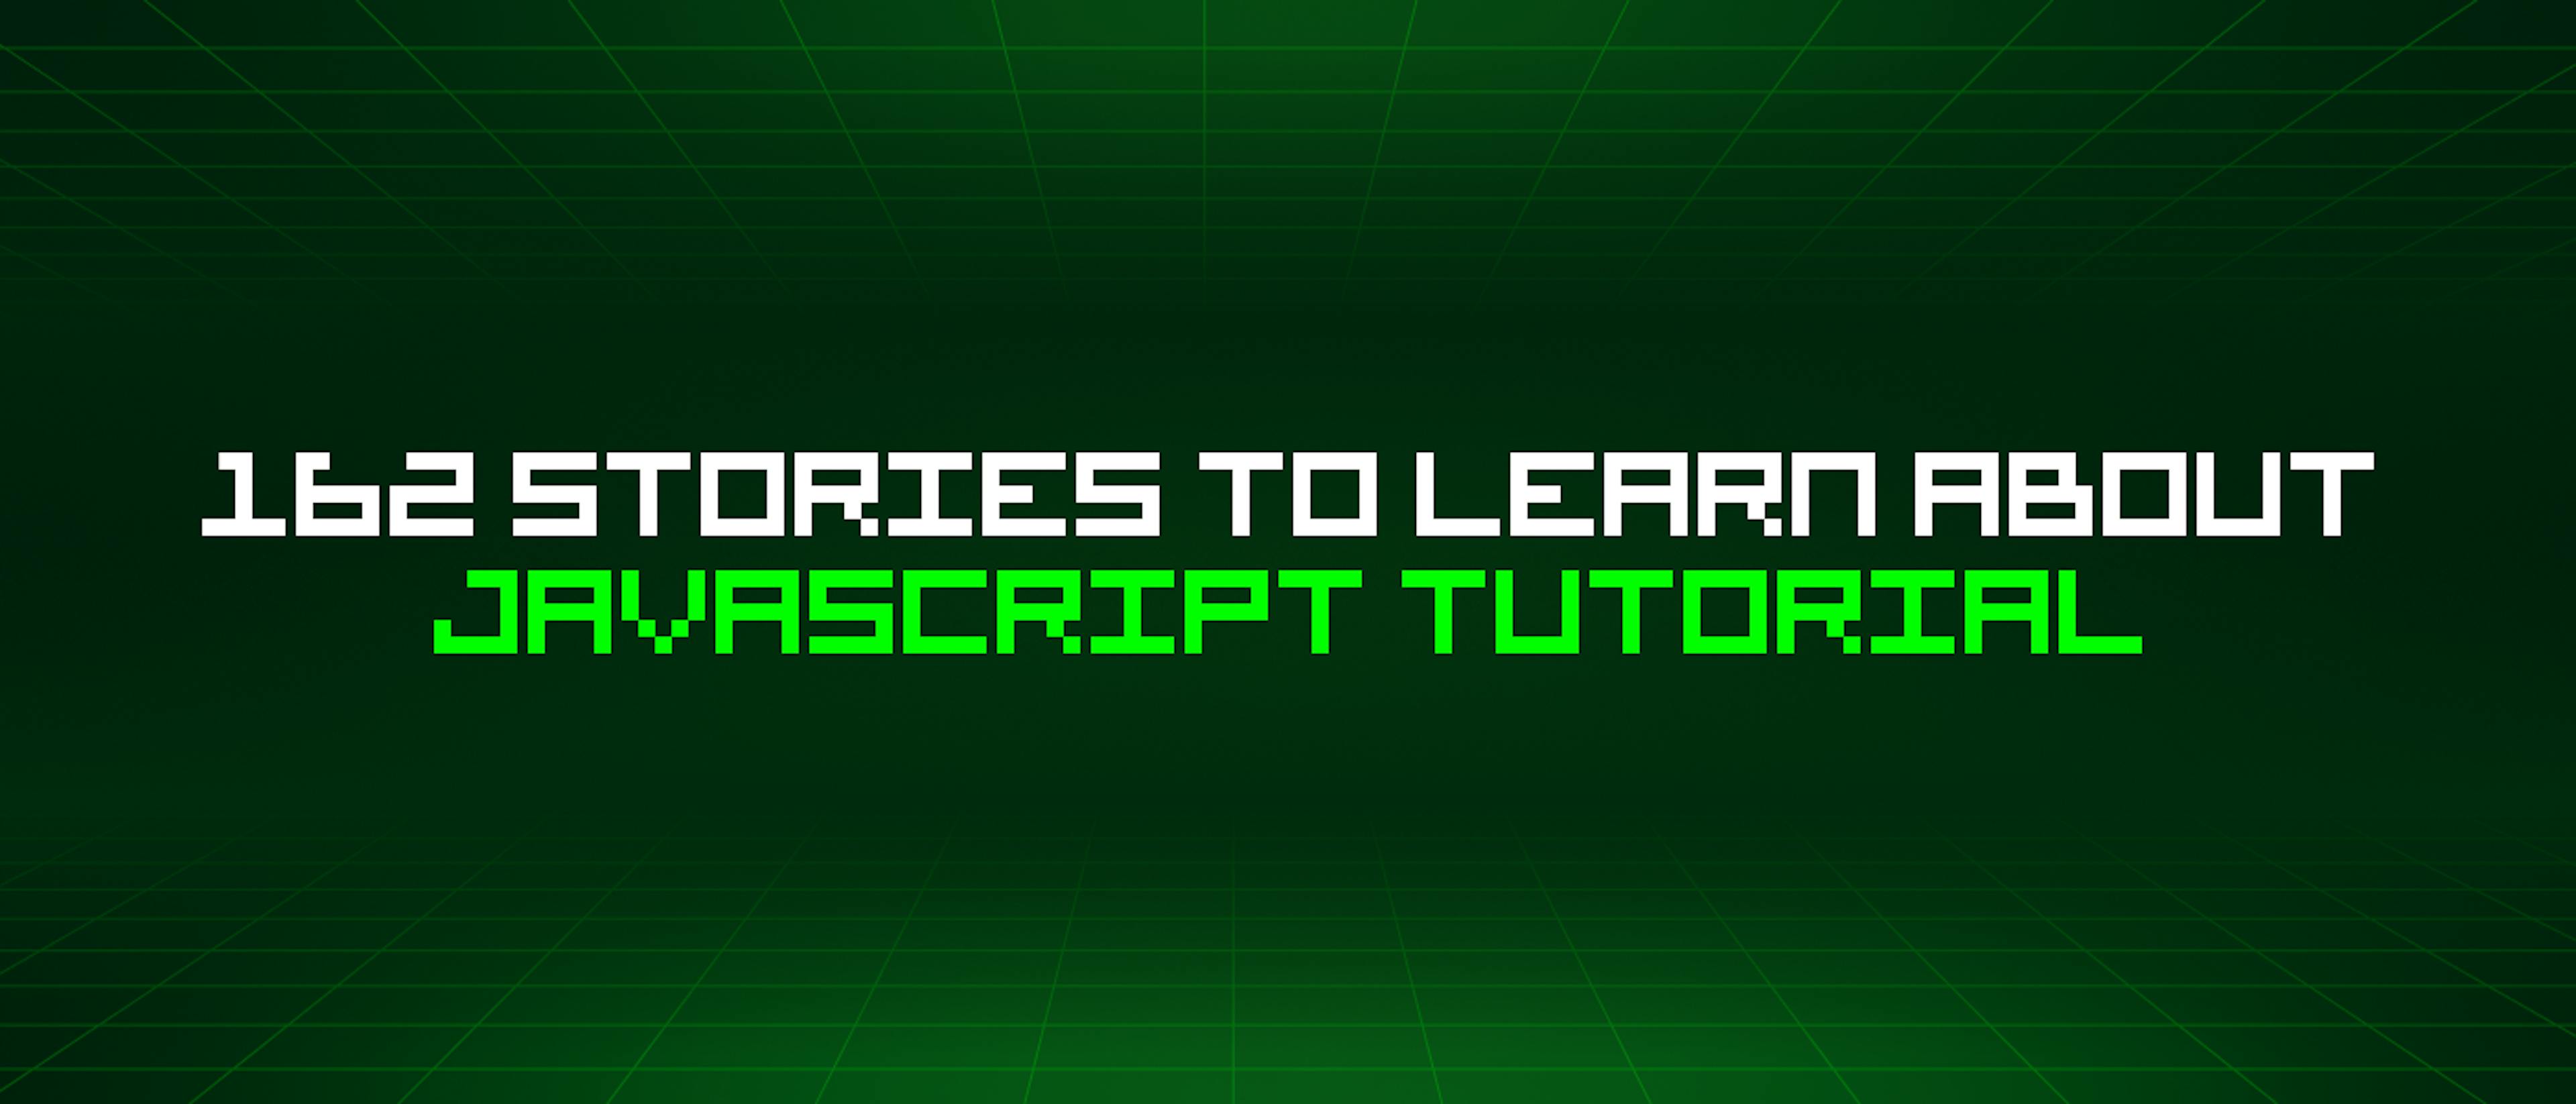 featured image - 162 Stories To Learn About Javascript Tutorial